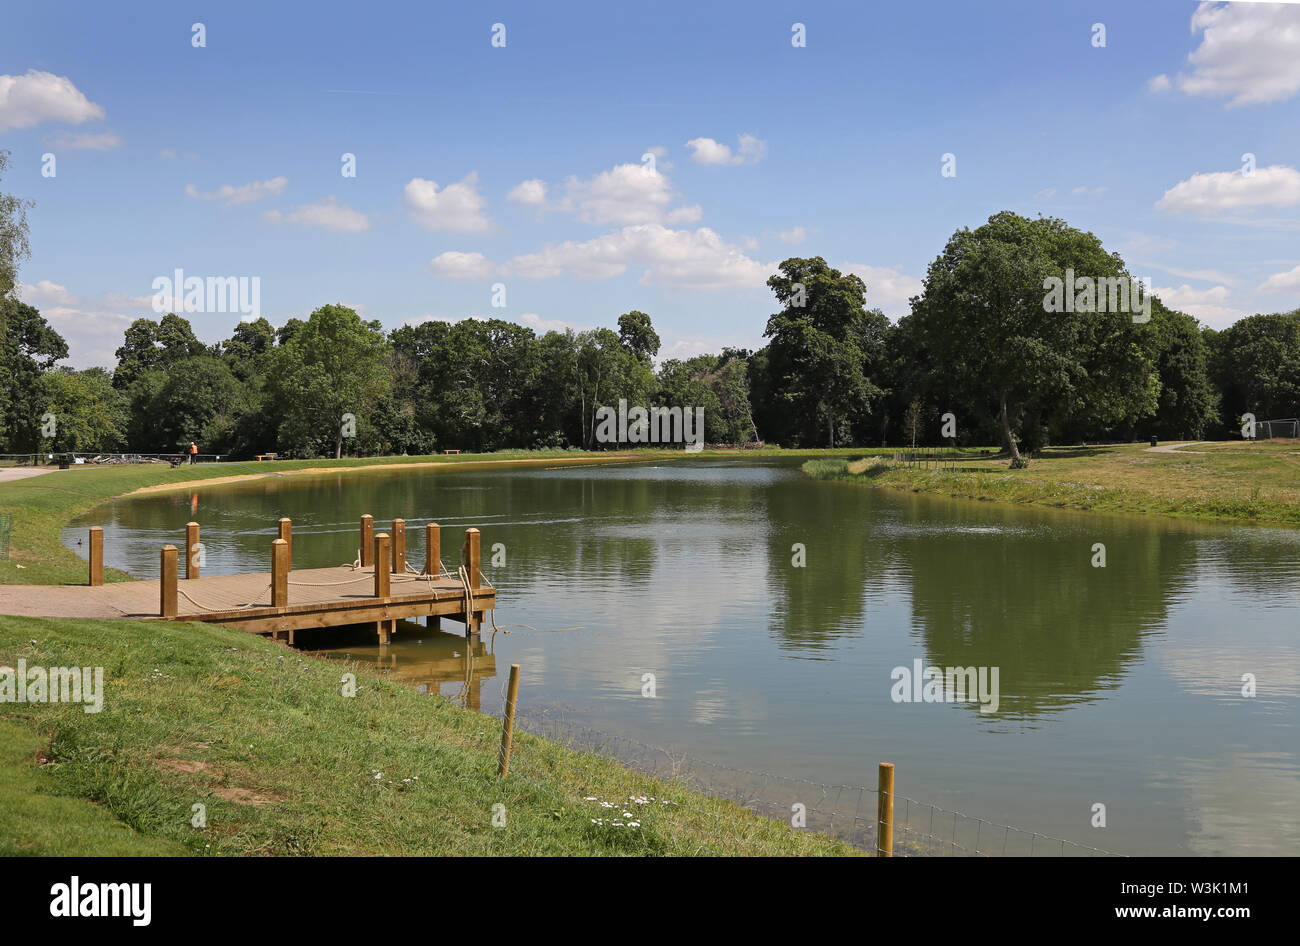 The new wild swimming lake in the restored grounds of Beckenham Place Park, London, UK, shown the week before its opening on July 20th 2019 Stock Photo